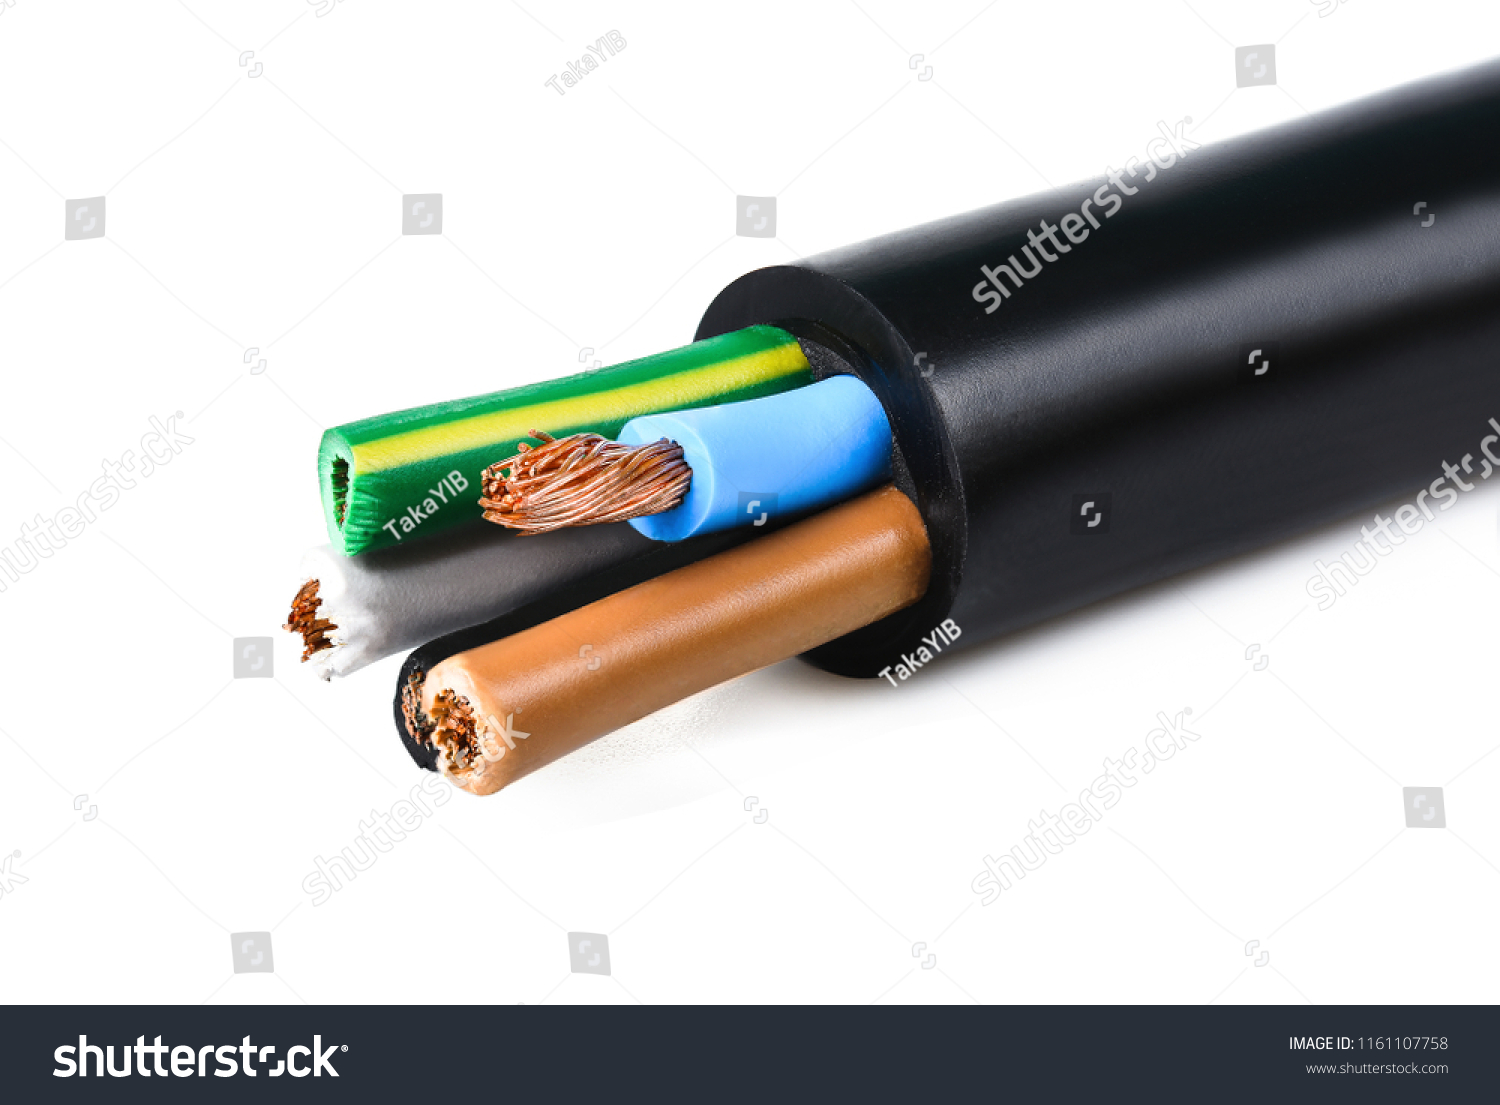 Electrical power cable on white background. Copper wire is the electric conductor of urban society. #1161107758